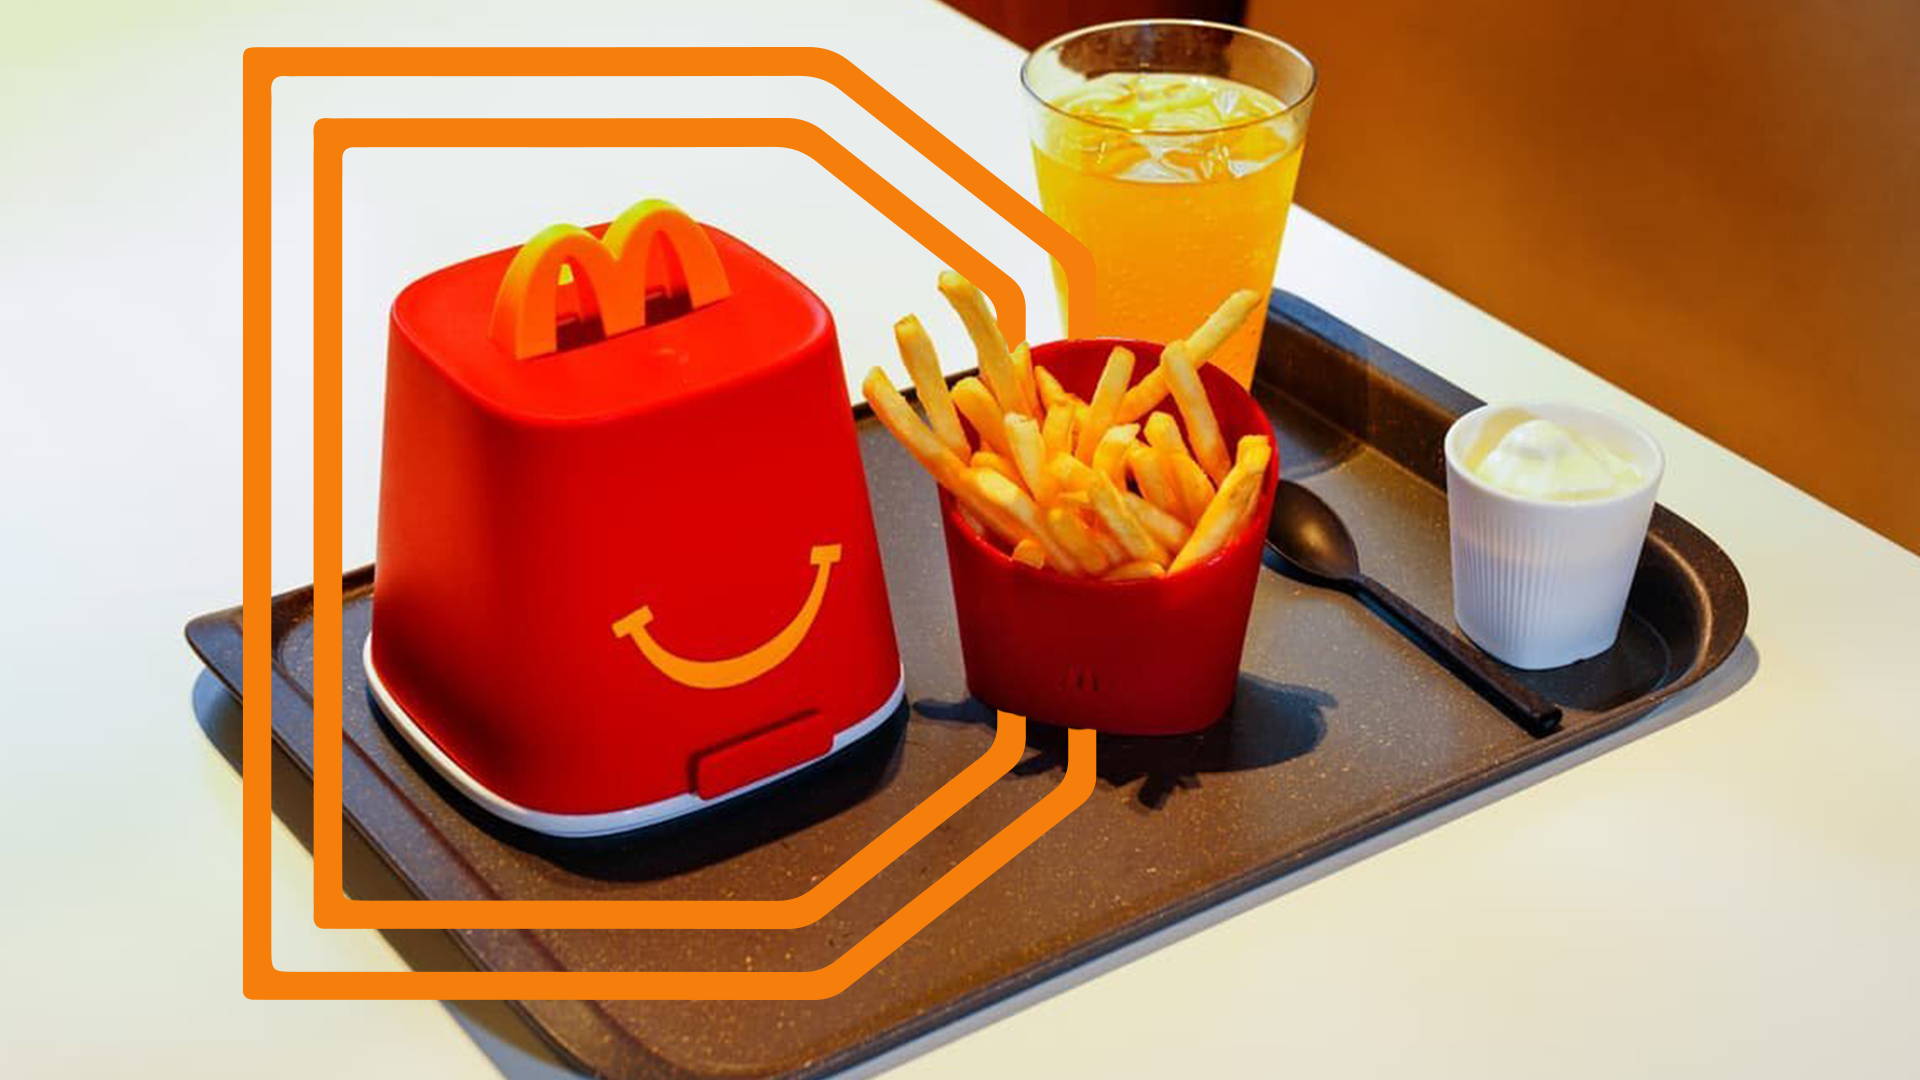 France Banned Single-Use Packaging On 'For Here' Fast Food Orders. Can the  US Do the Same Thing?